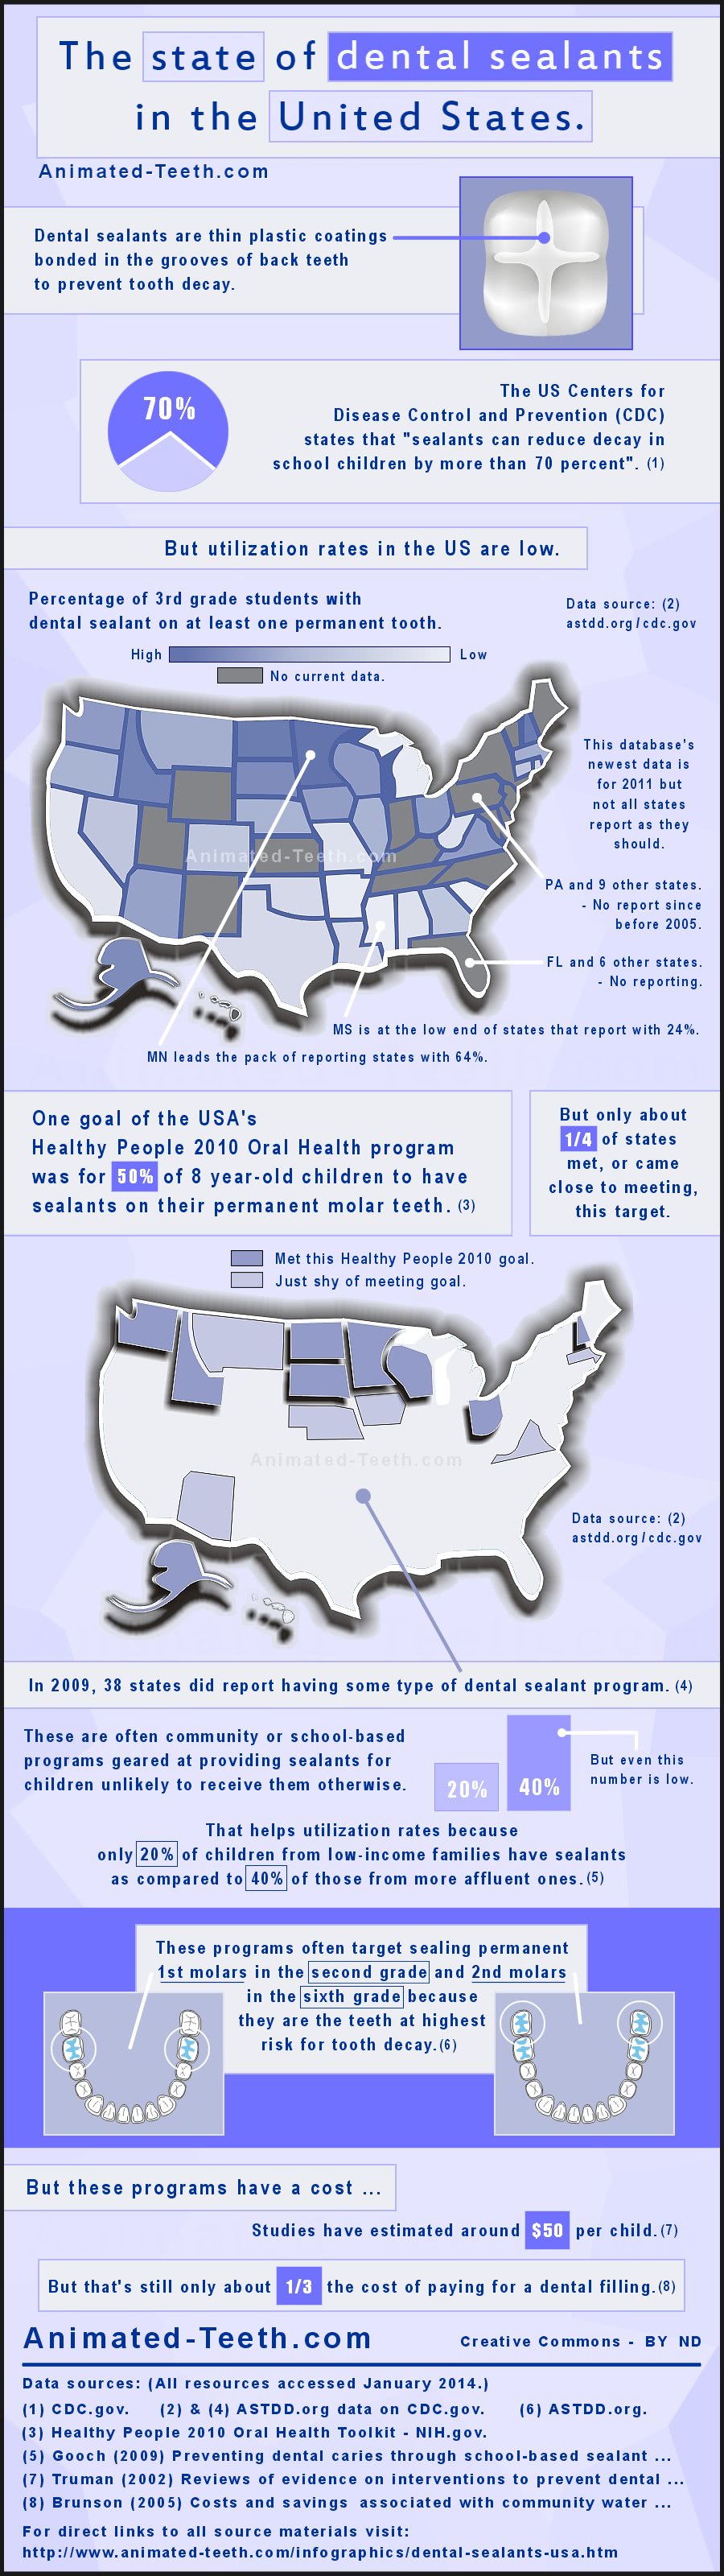 Infographic: The state of dental sealants in the United States.